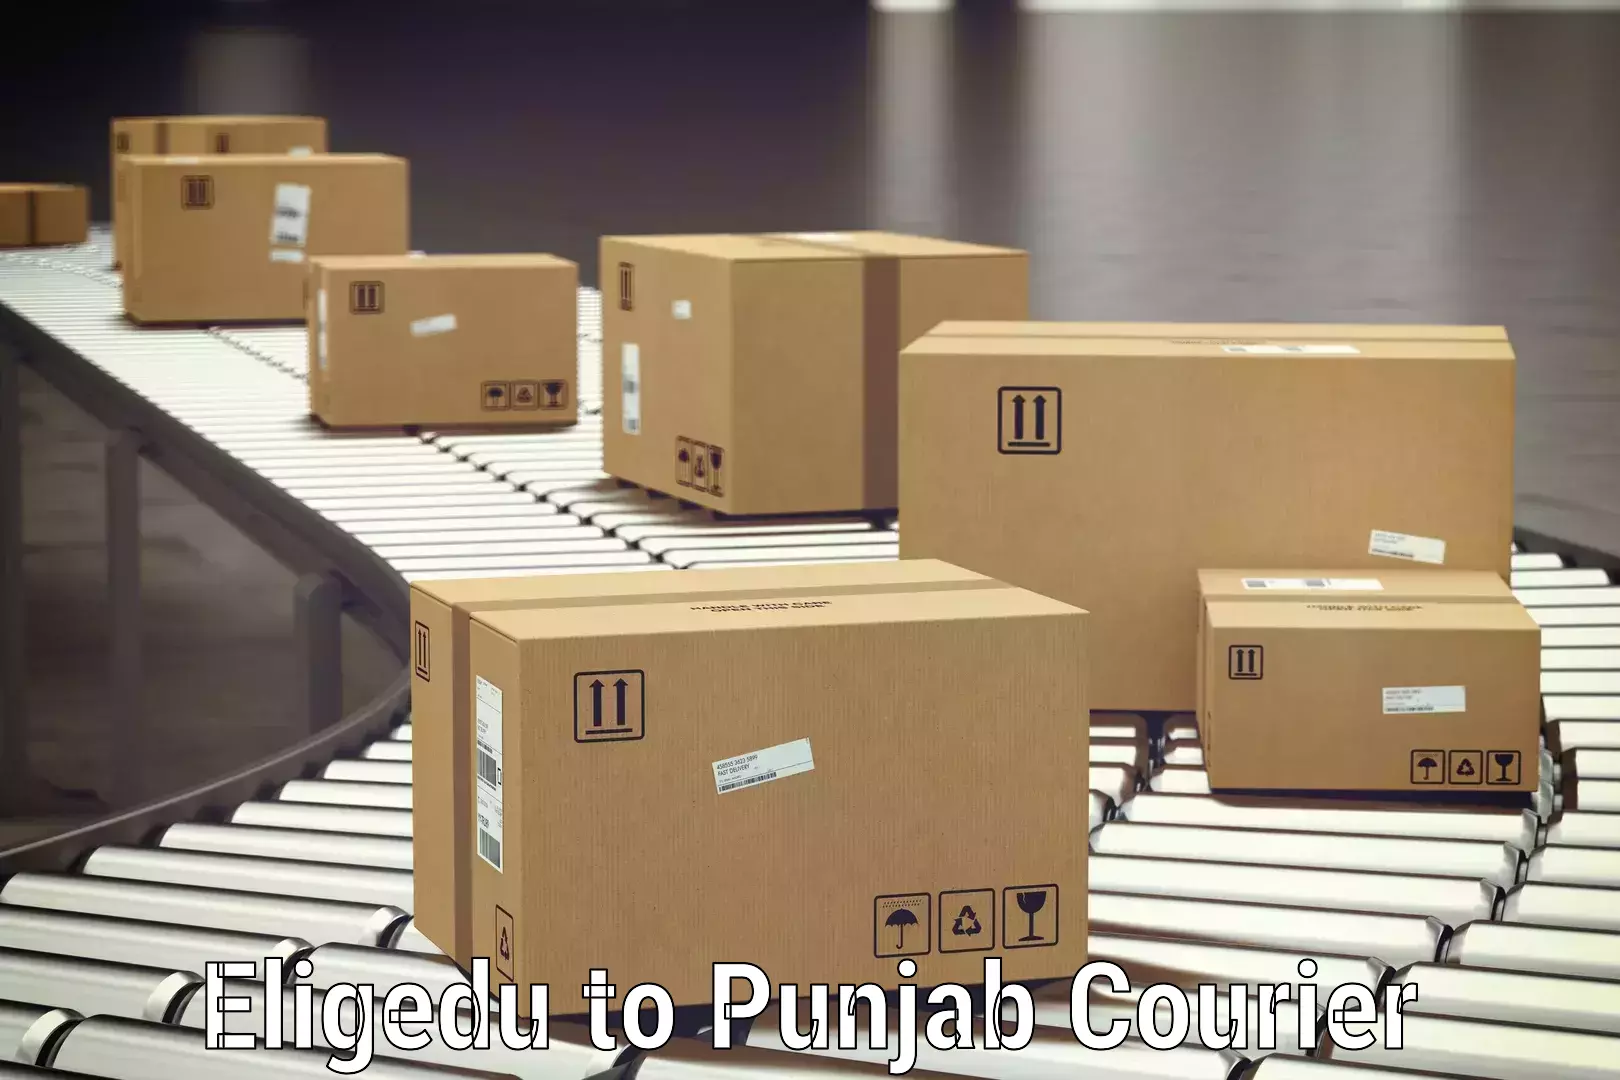 Baggage shipping service Eligedu to Mohali